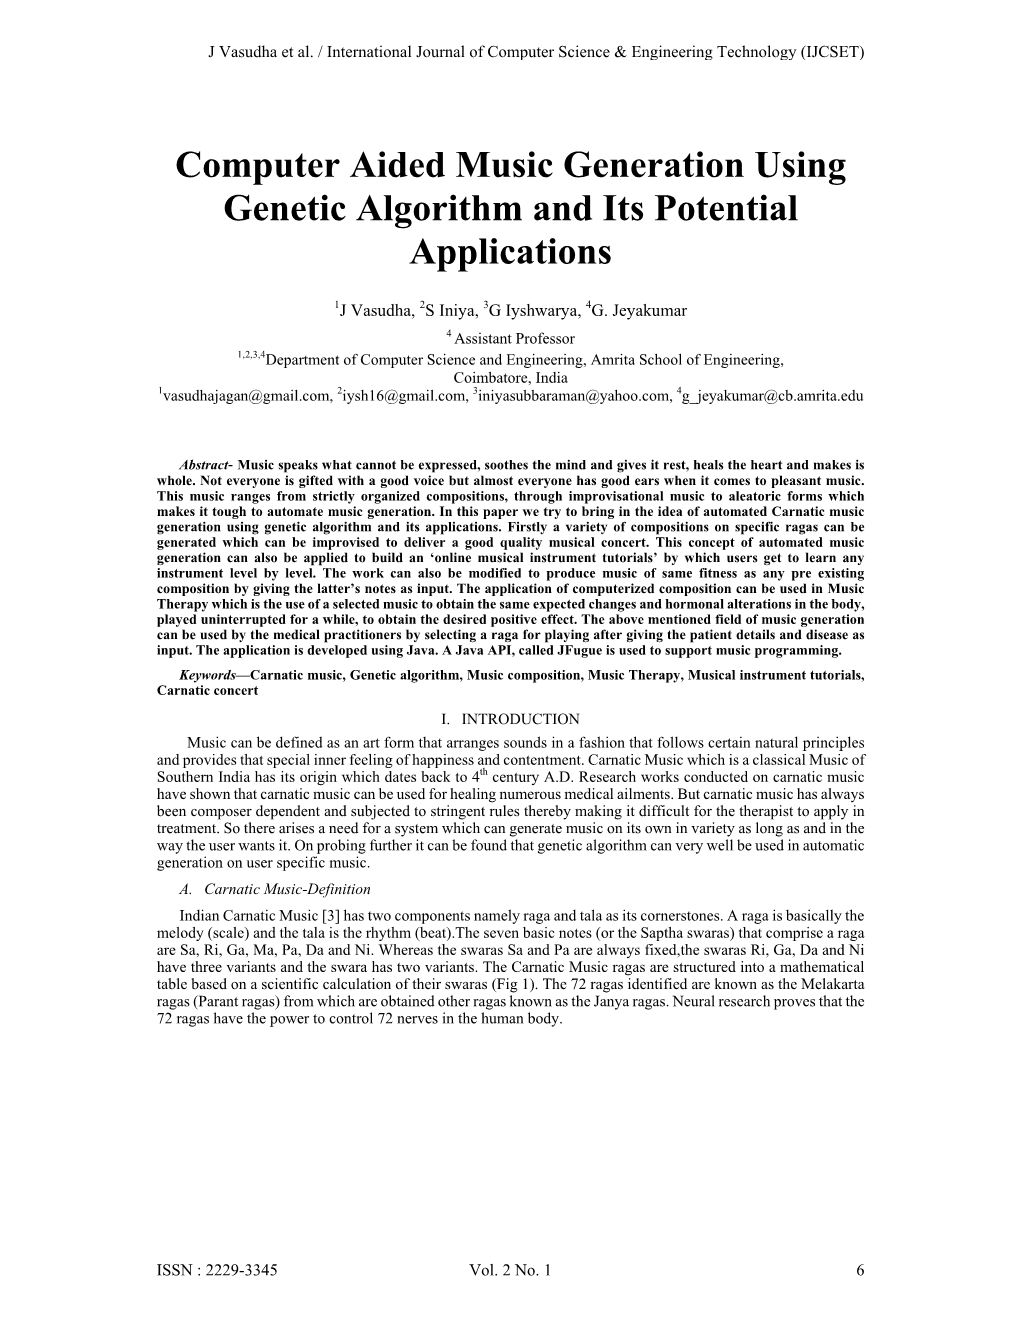 Computer Aided Music Generation Using Genetic Algorithm and Its Potential Applications